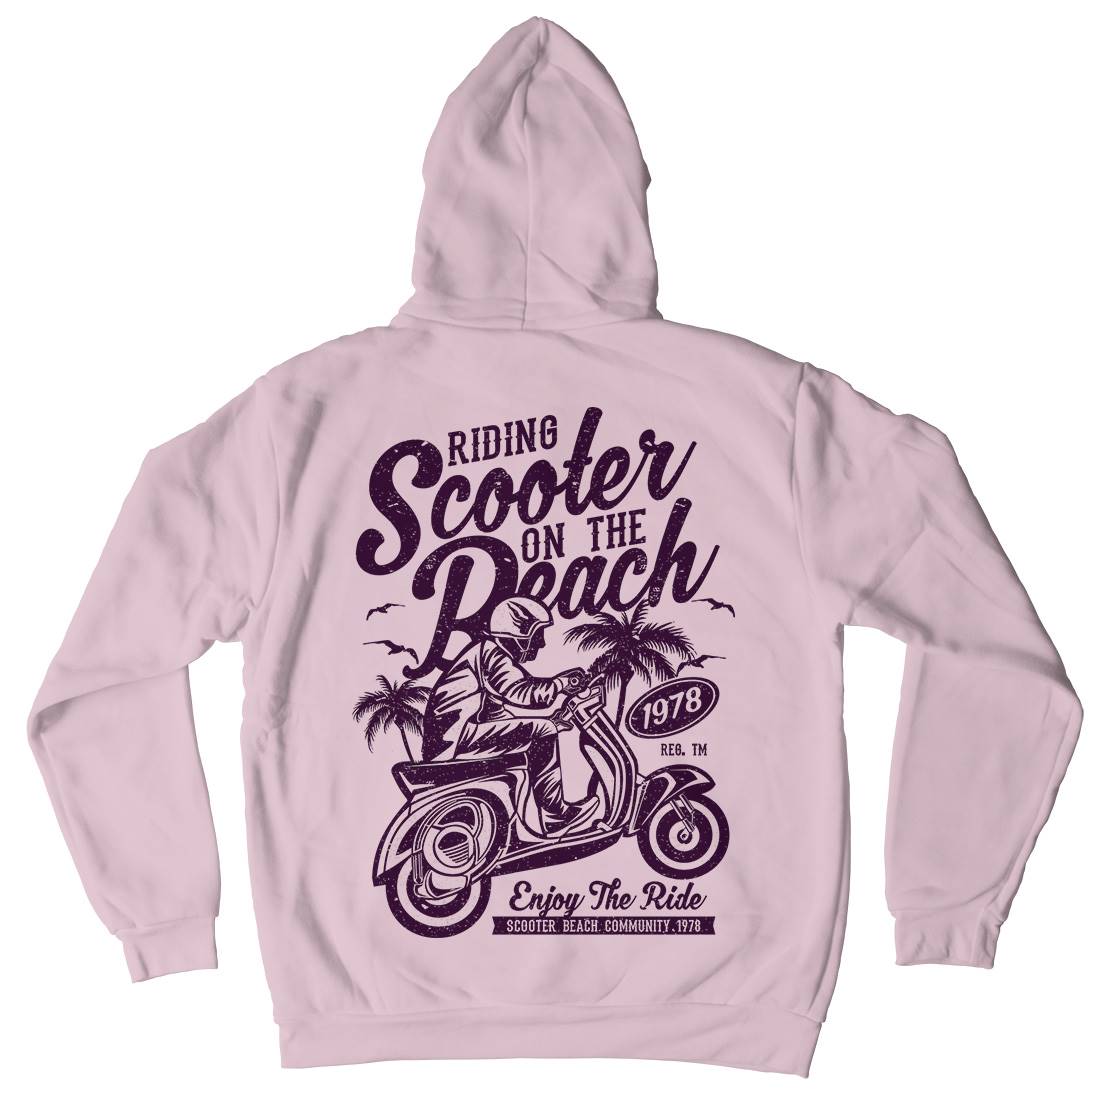 Scooter Beach Kids Crew Neck Hoodie Motorcycles A134